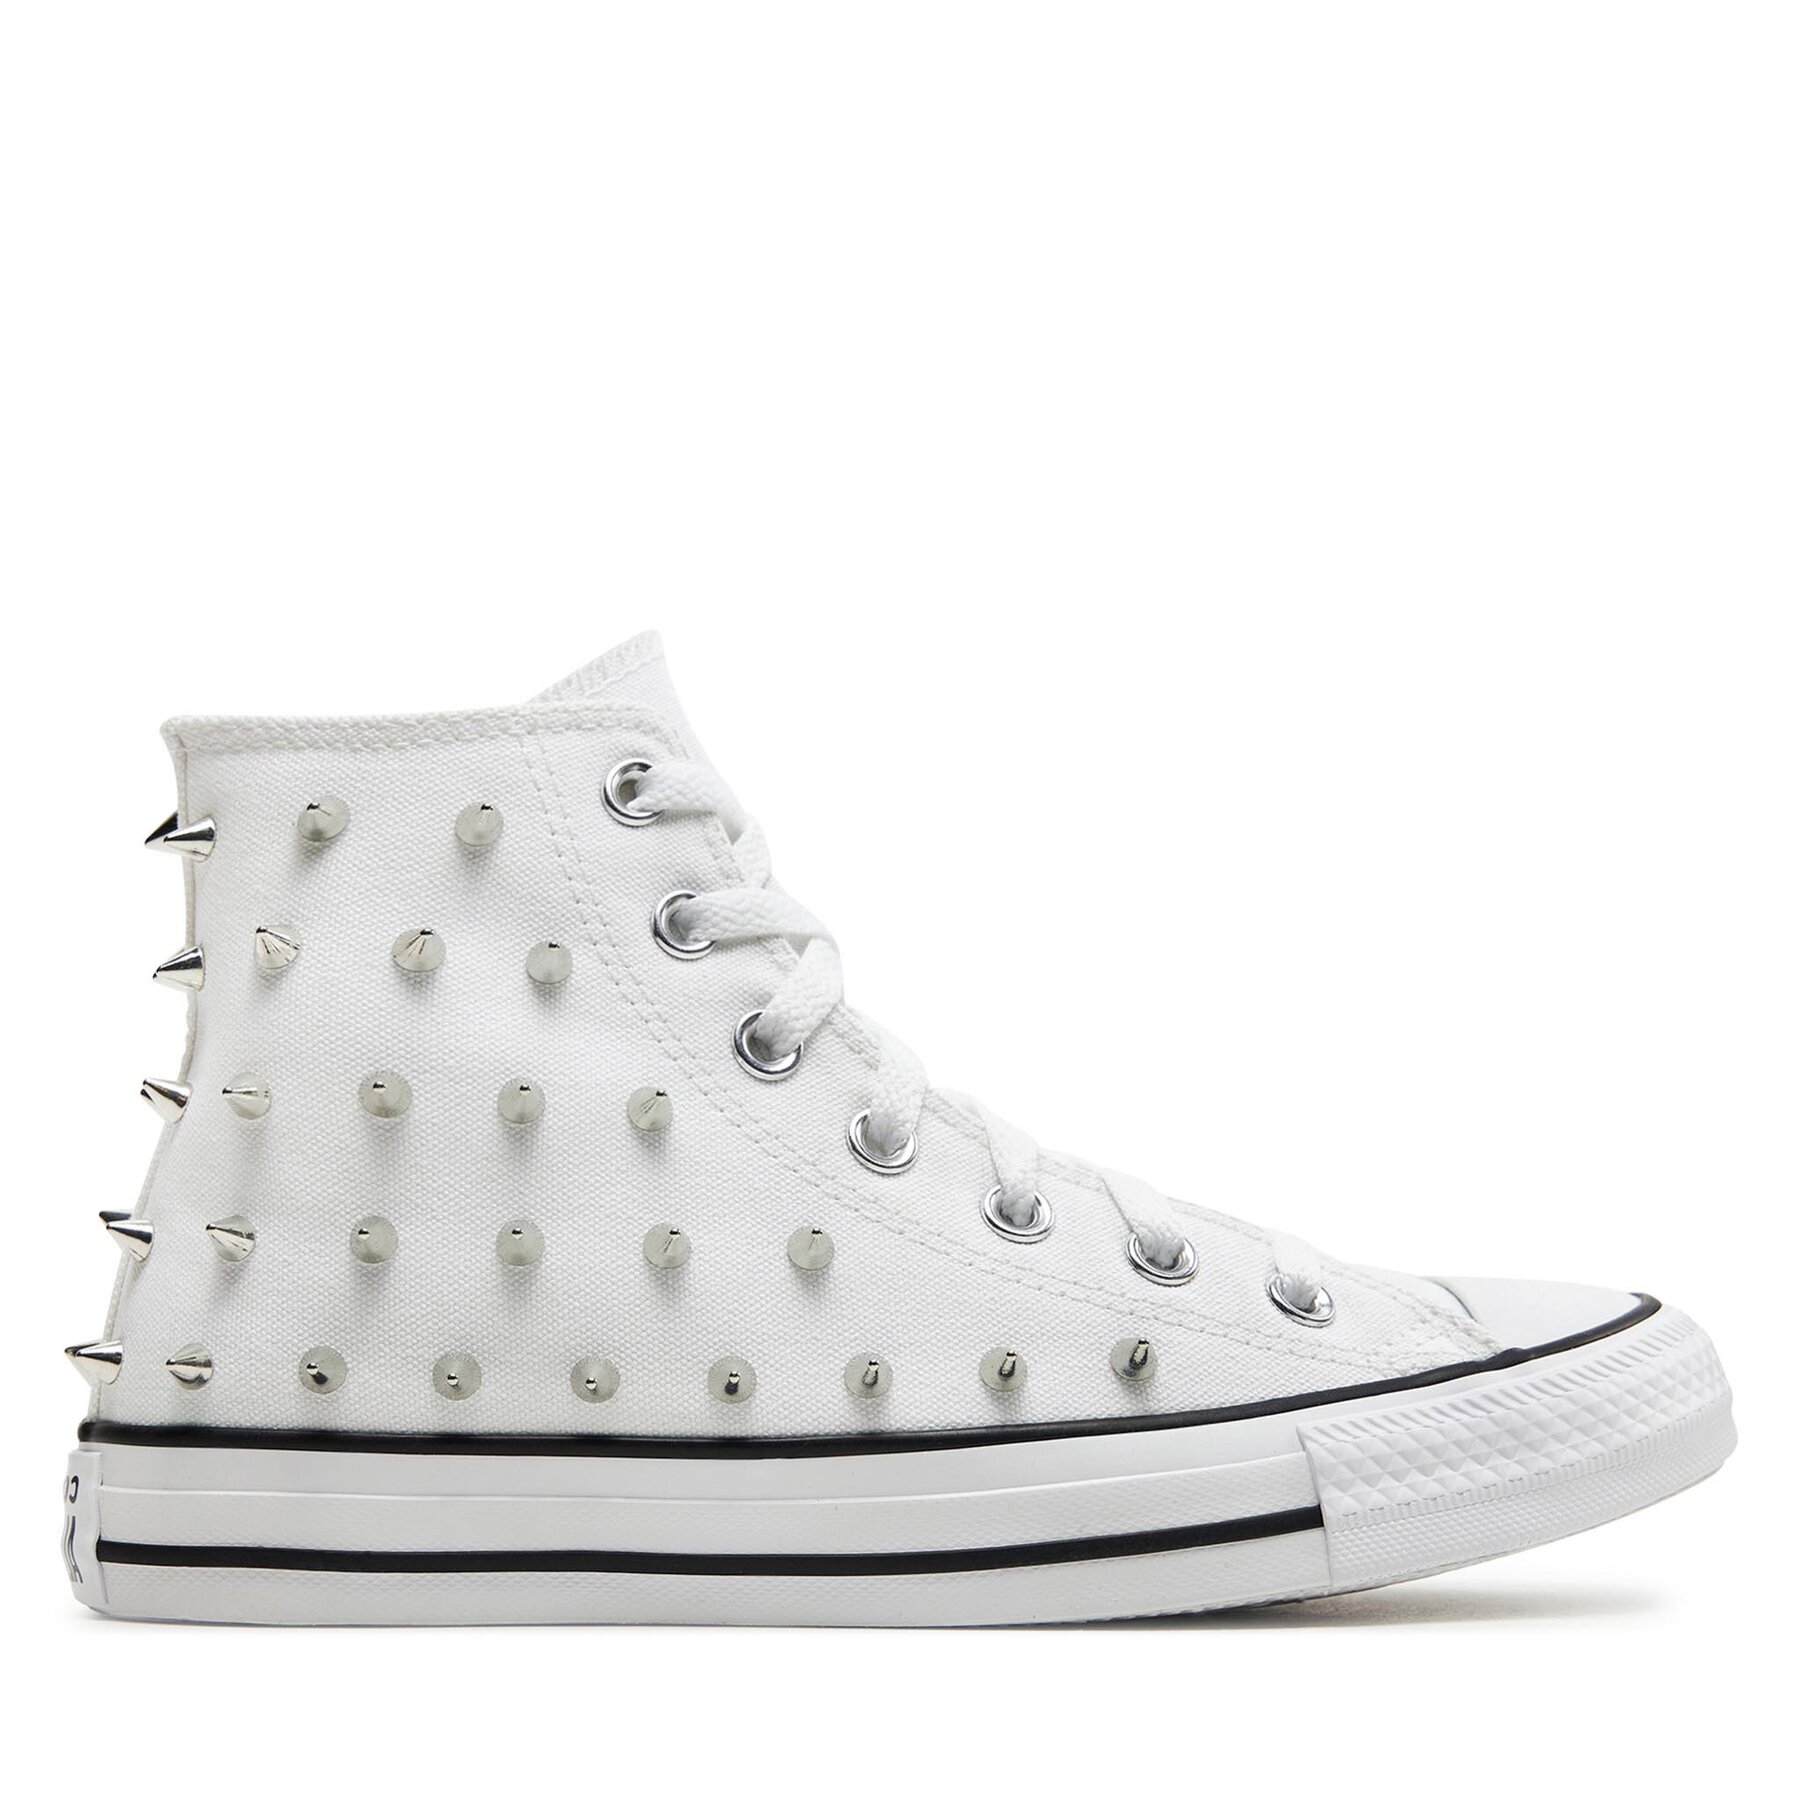 Sneakers aus Stoff Converse Chuck Taylor All Star Studded A06444C White/Black/White von Converse